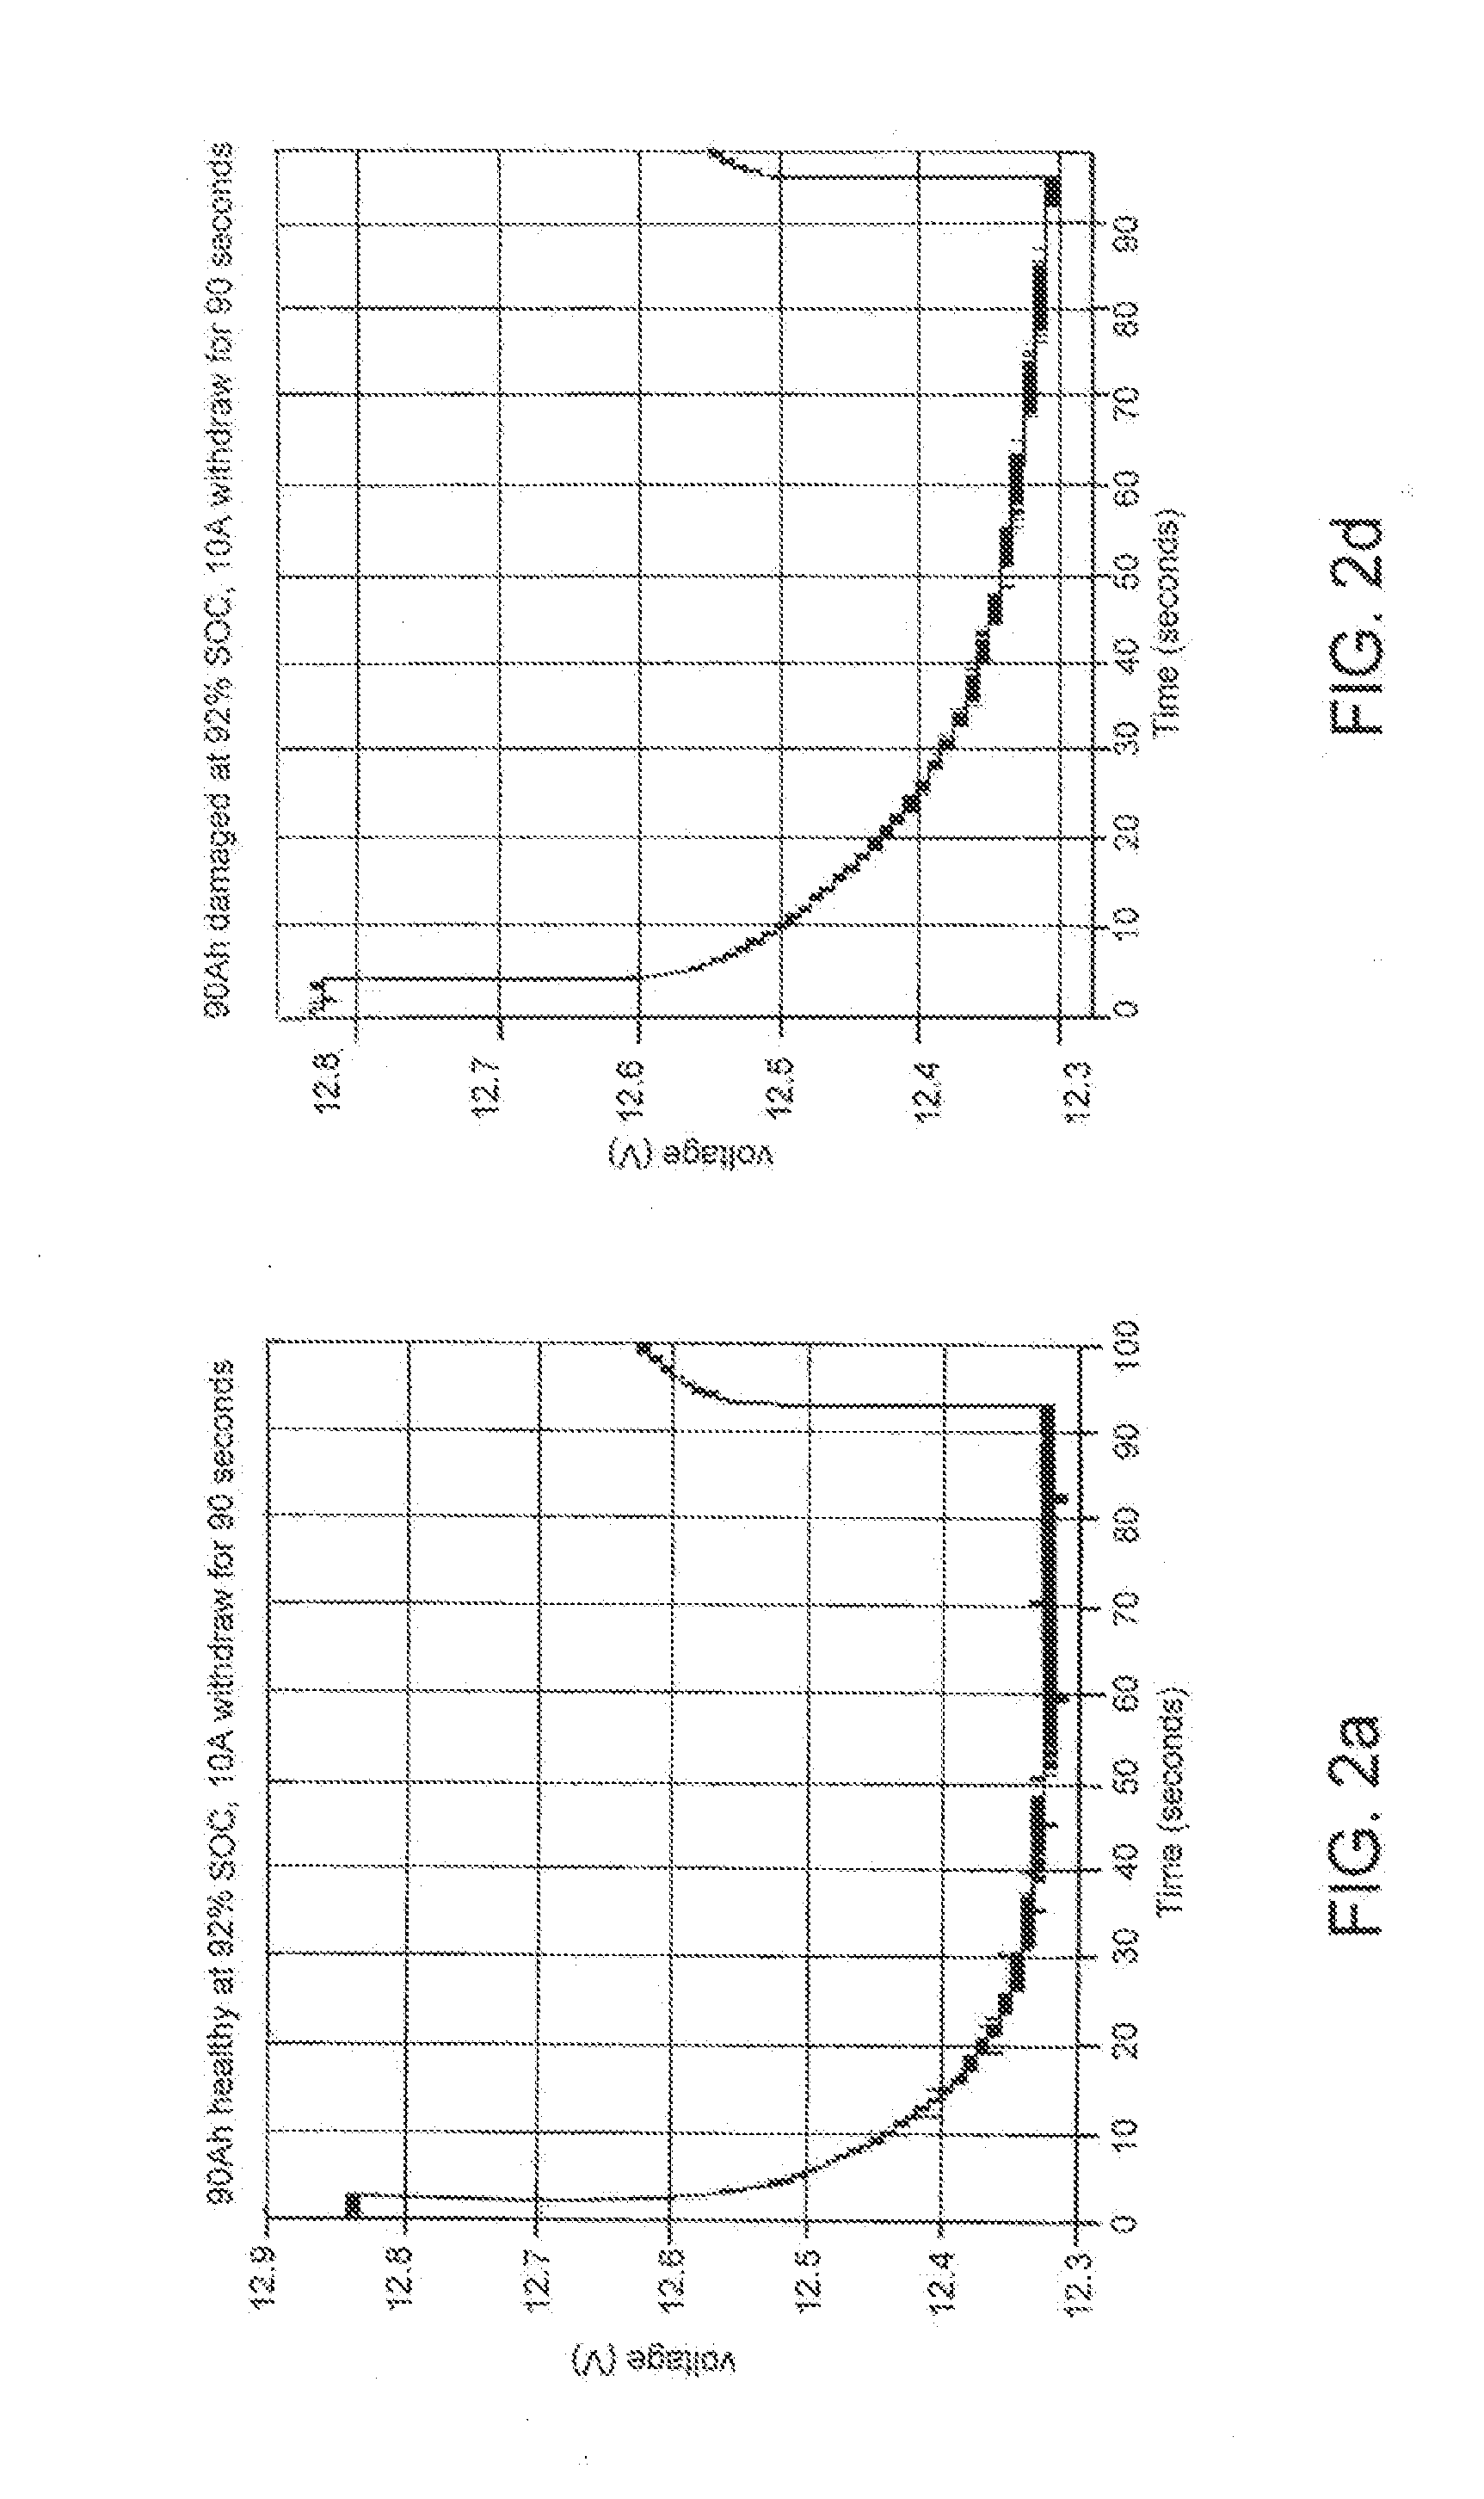 Systems and Methods to Determine the Condition of a Battery